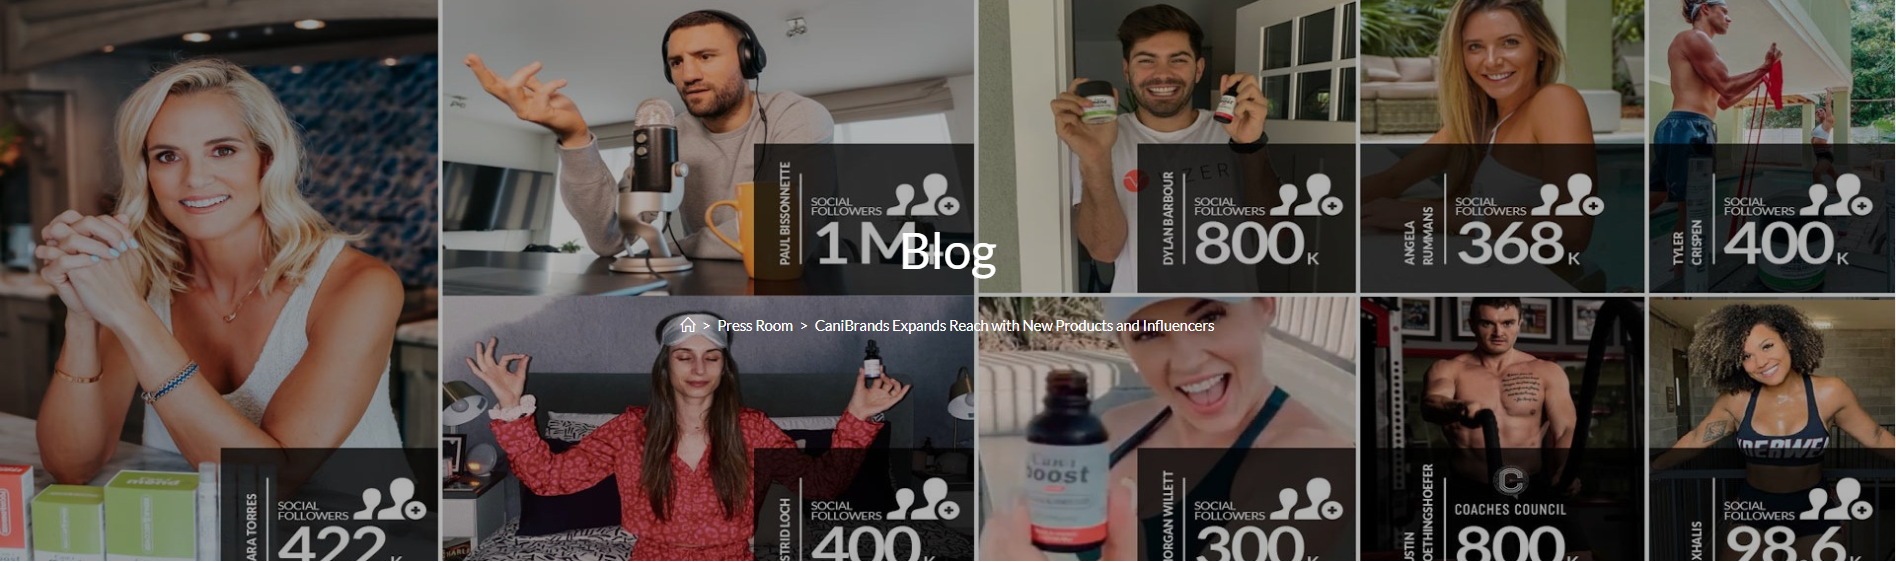 CaniBrands Expands Reach with New Products and Influencers